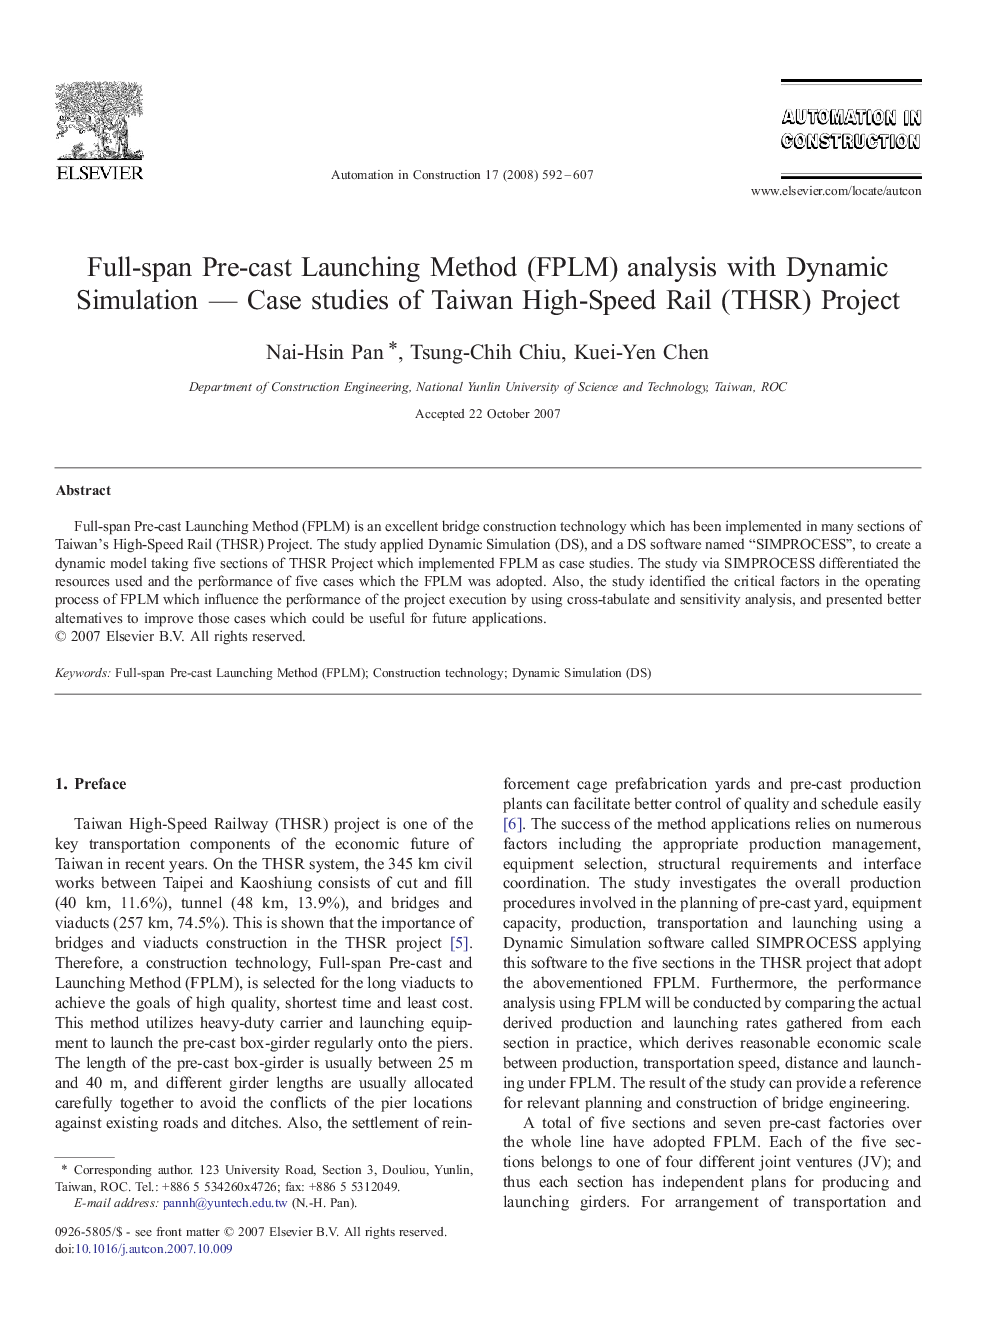 Full-span Pre-cast Launching Method (FPLM) analysis with Dynamic Simulation — Case studies of Taiwan High-Speed Rail (THSR) Project